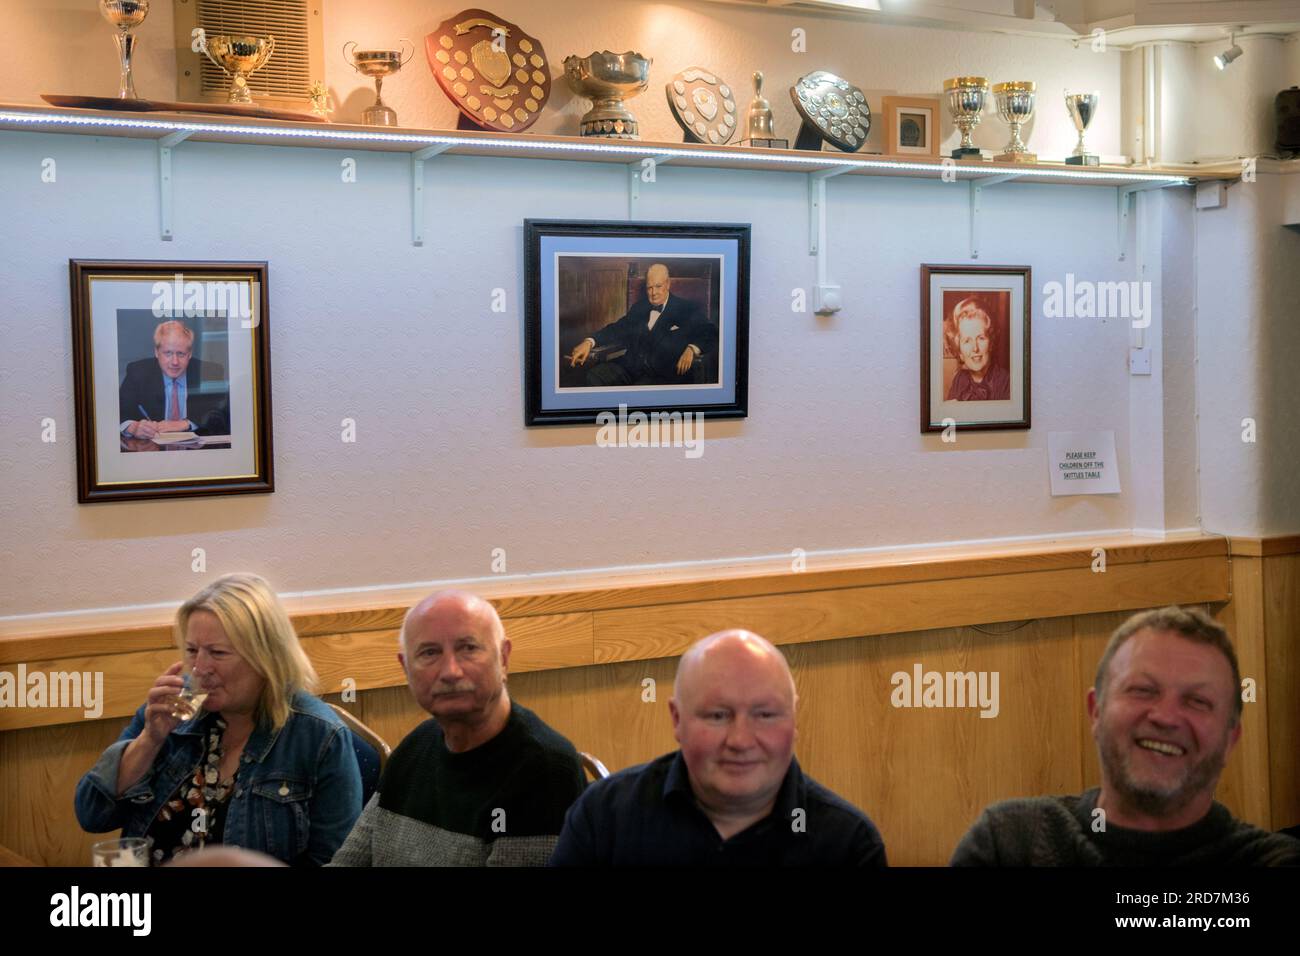 Conservative Party Club members. The Conservative Club in the Kettering Constituency  photographs of Conservative Prime Ministers, Borris Johnson, Winston Churchill, Margaret Thatcher on the wall. Rothwell, Northamptonshire, England 5th June 2023 2020s UK HOMER SYKES Stock Photo